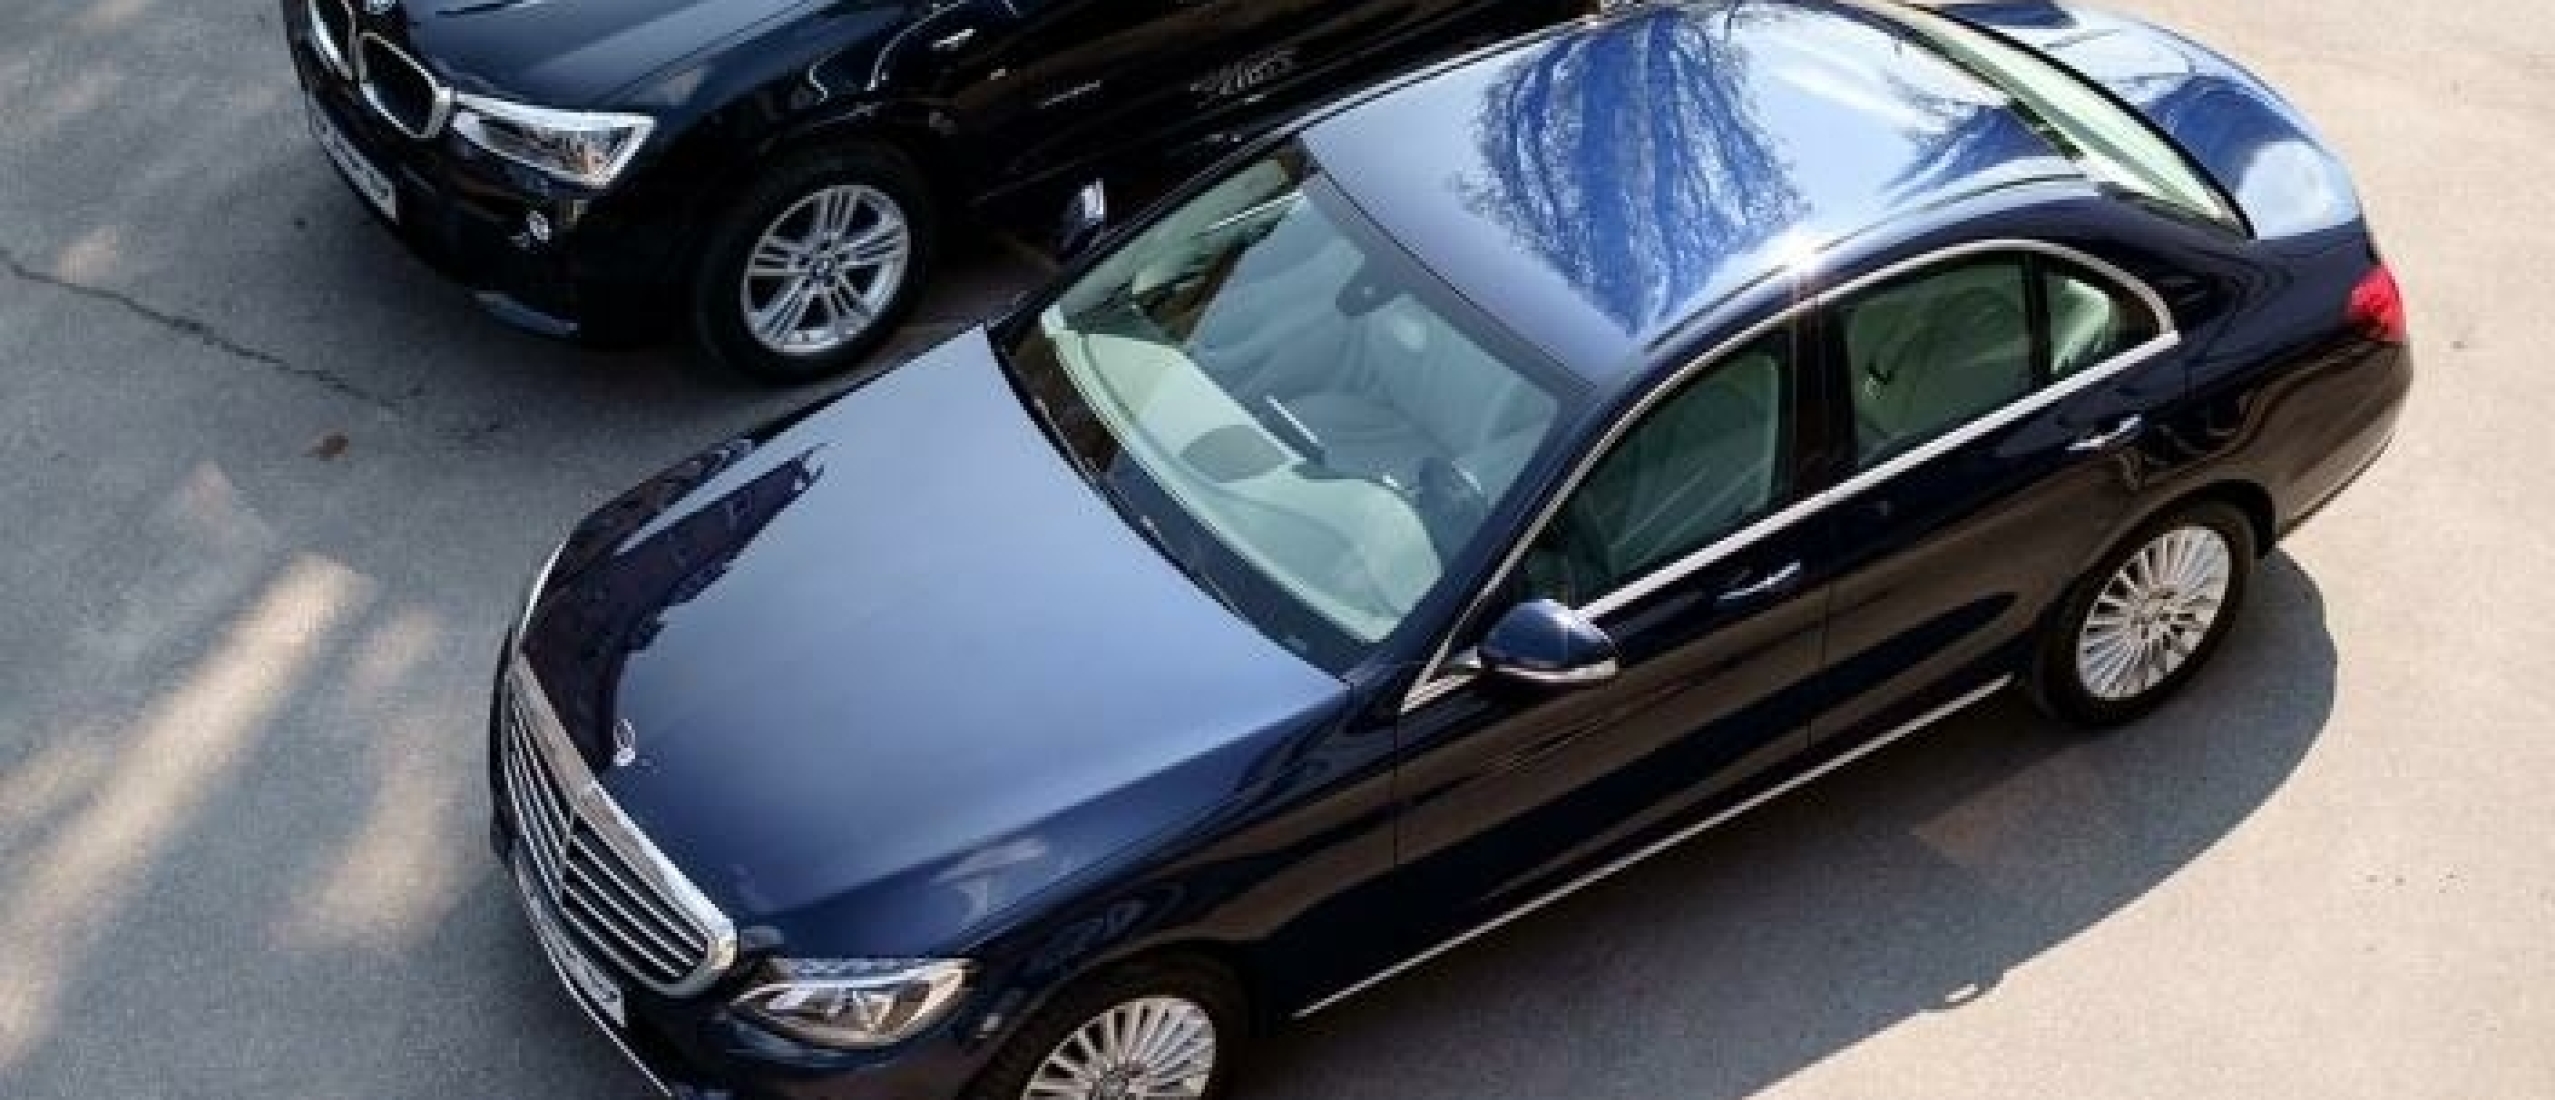 6 Reasons to Hire Corporate Chauffeur Services for Clients